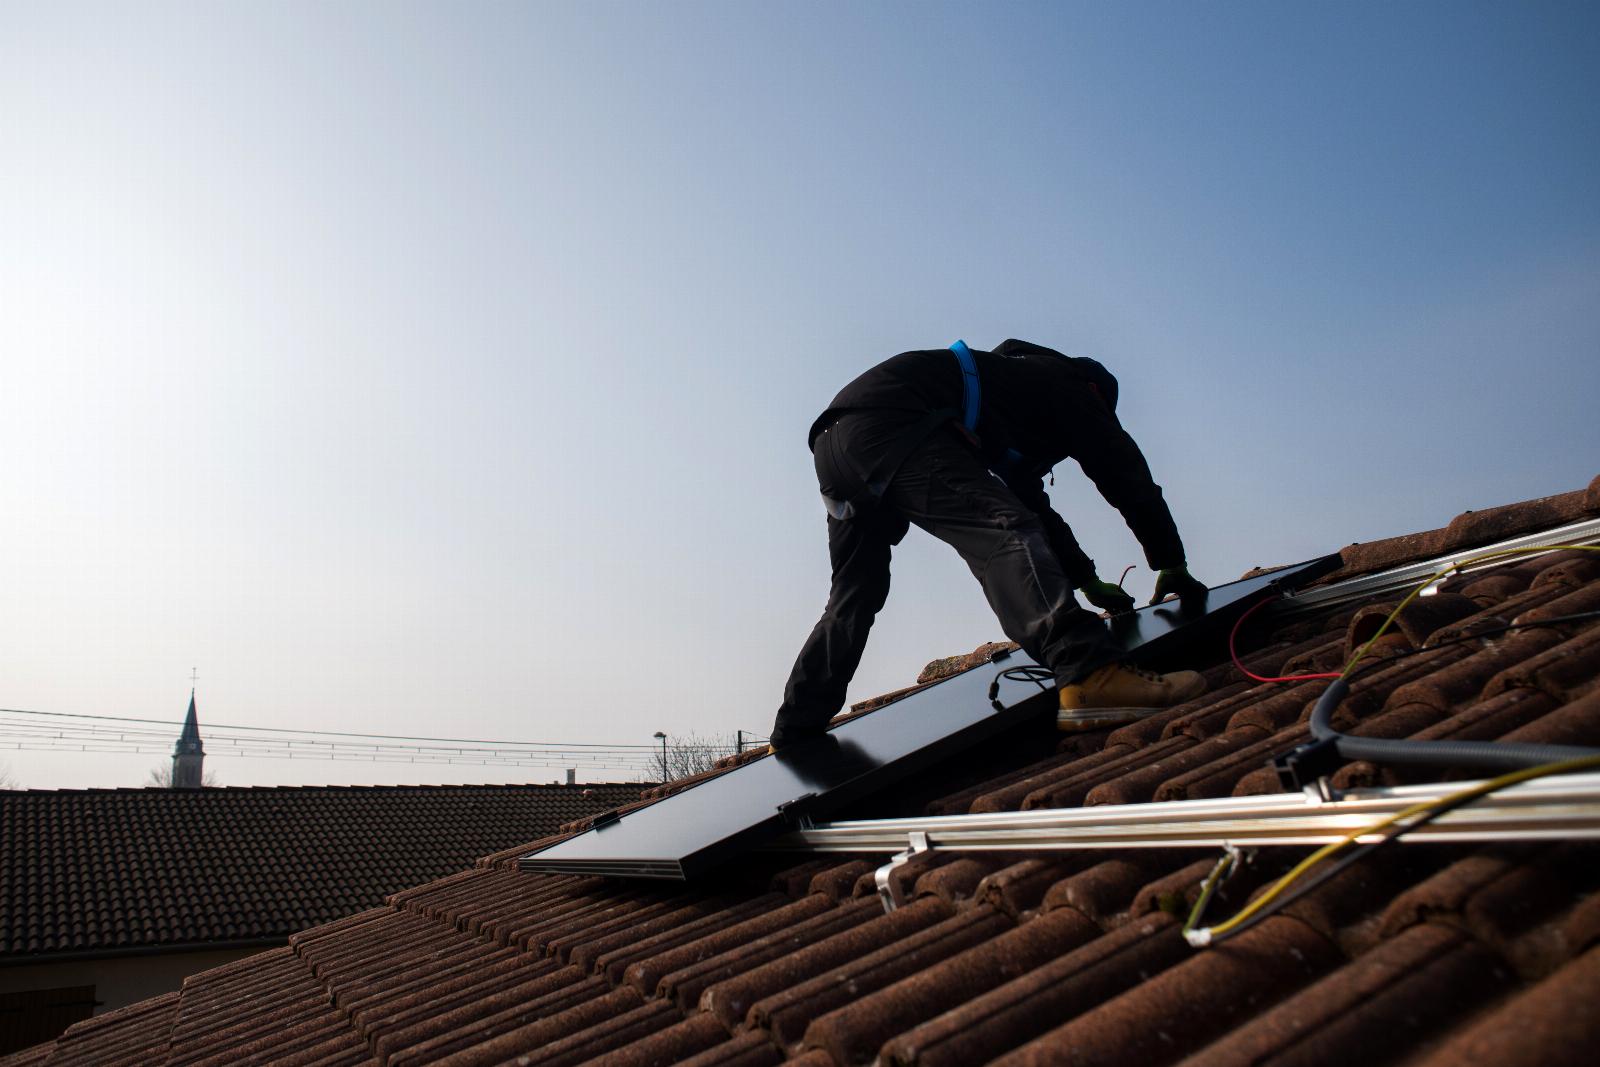 Regulatory approval for this subscription solar UK startup could mean more are to come